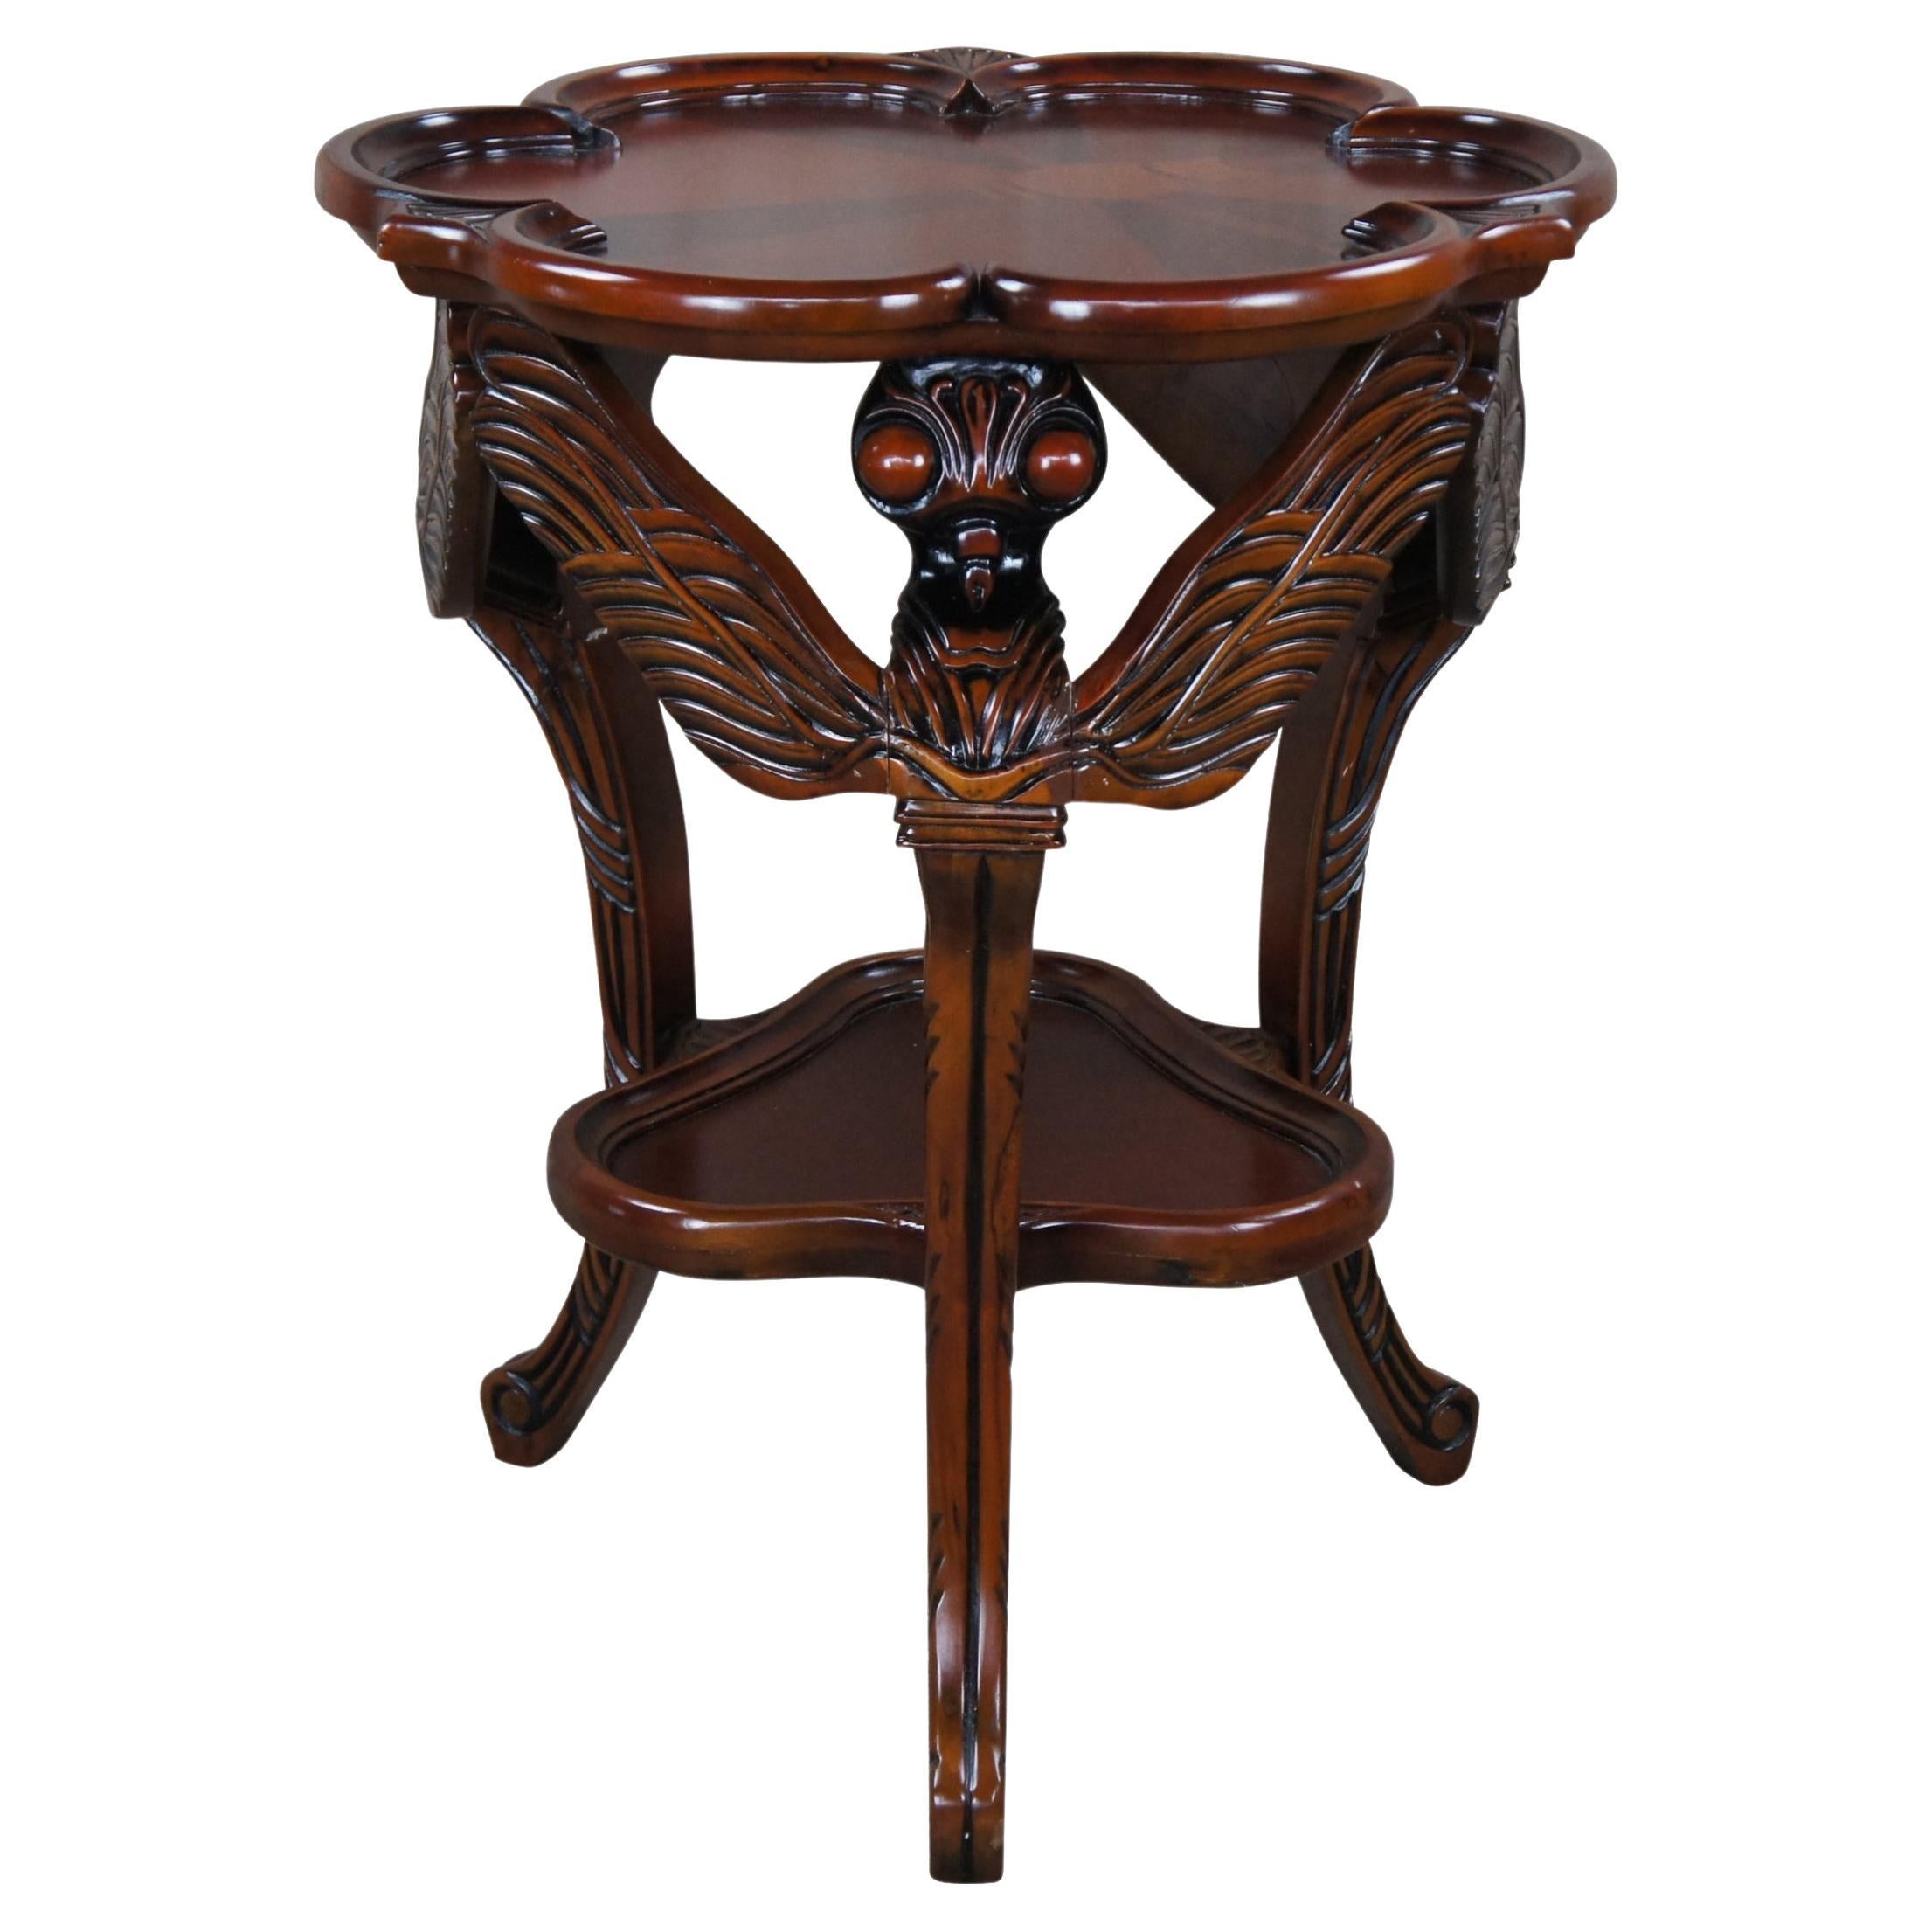 Design Toscano French Art Nouveau Mahogany Galle Dragonfly Occasional Table